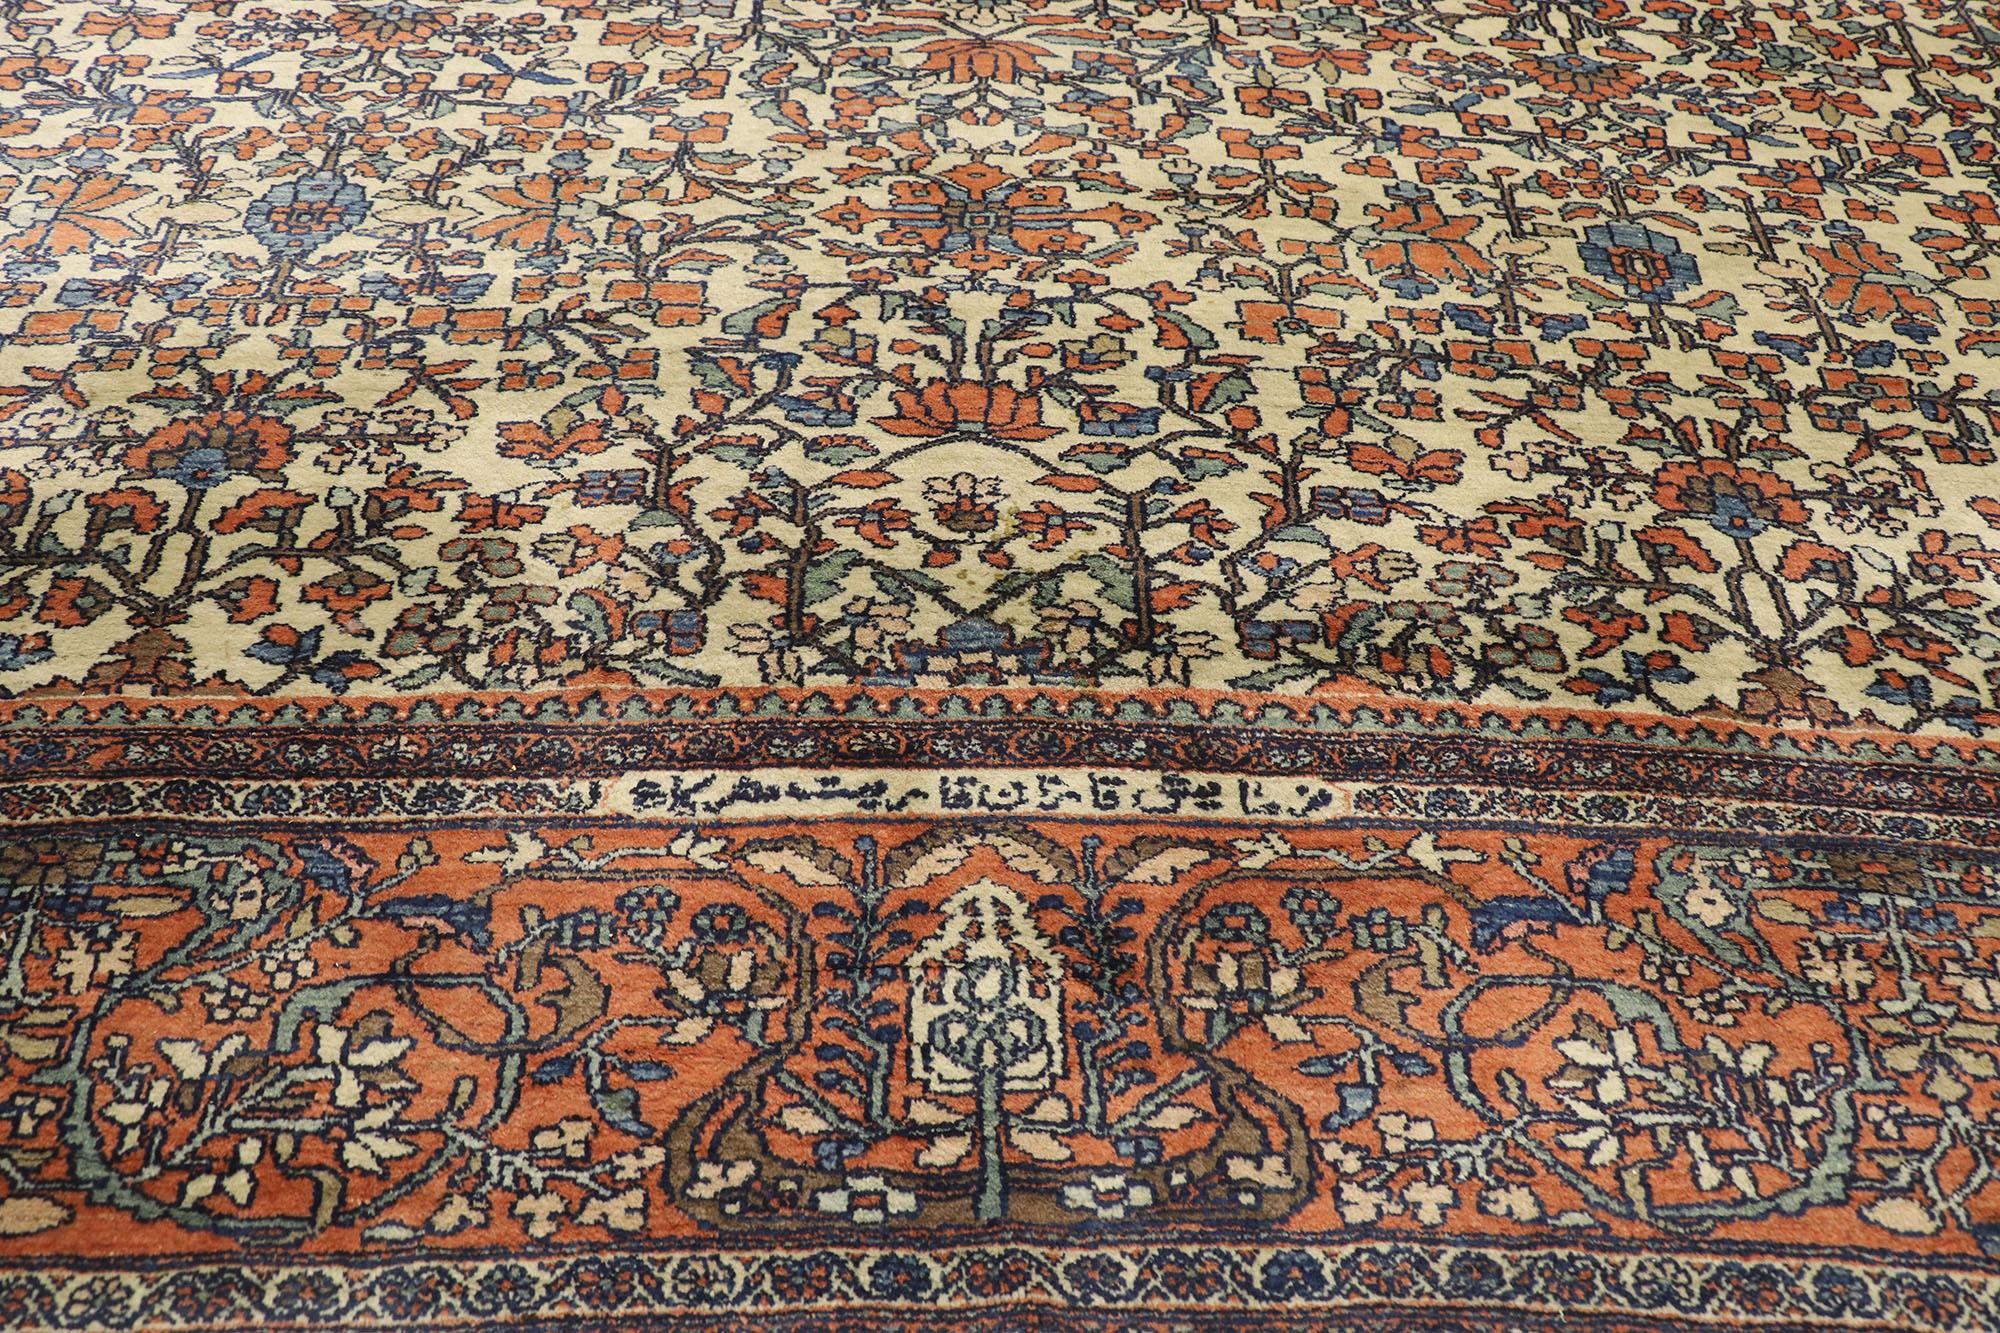 1880s Oversized Antique Persian Sarouk Farahan Rug, Hotel Lobby Size Carpet In Good Condition For Sale In Dallas, TX